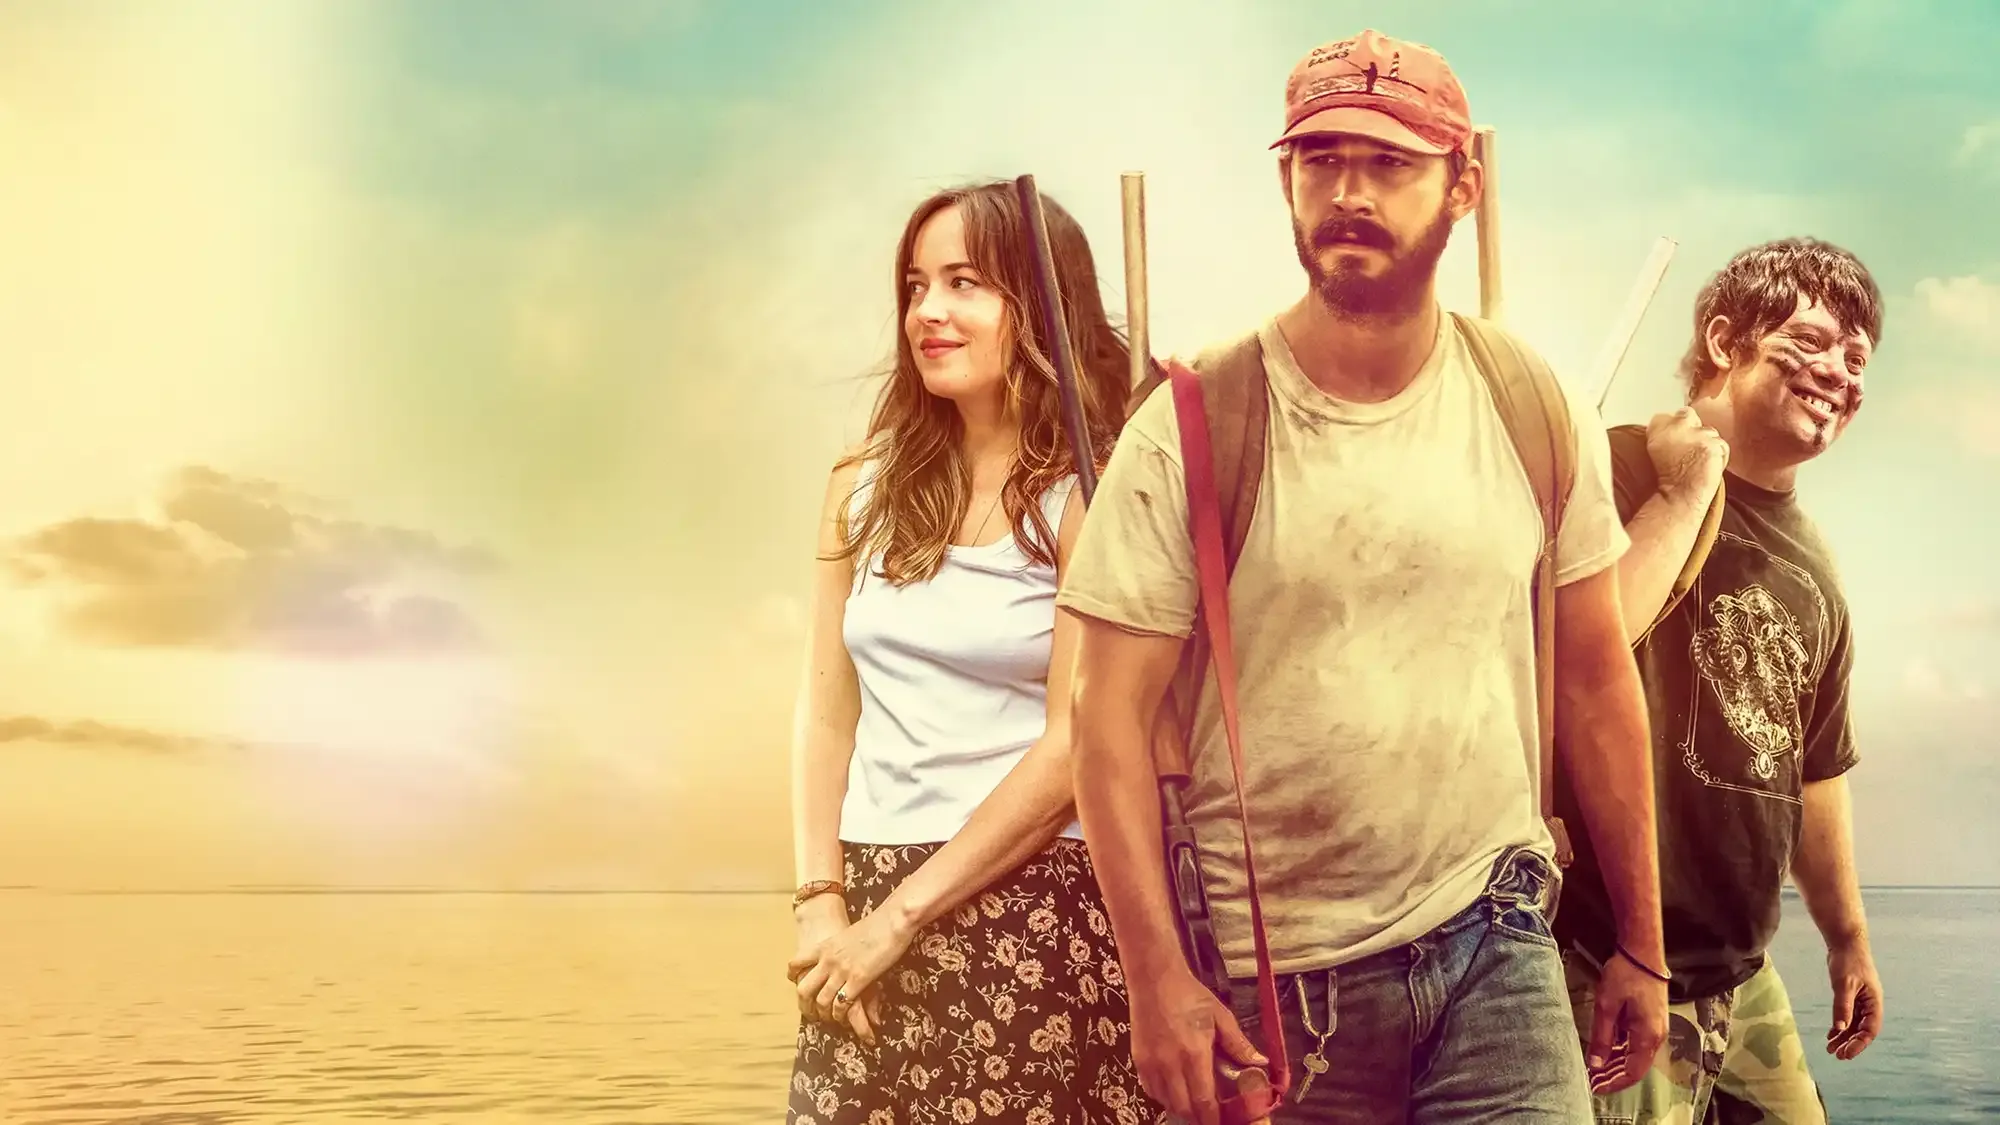 The Peanut Butter Falcon movie review